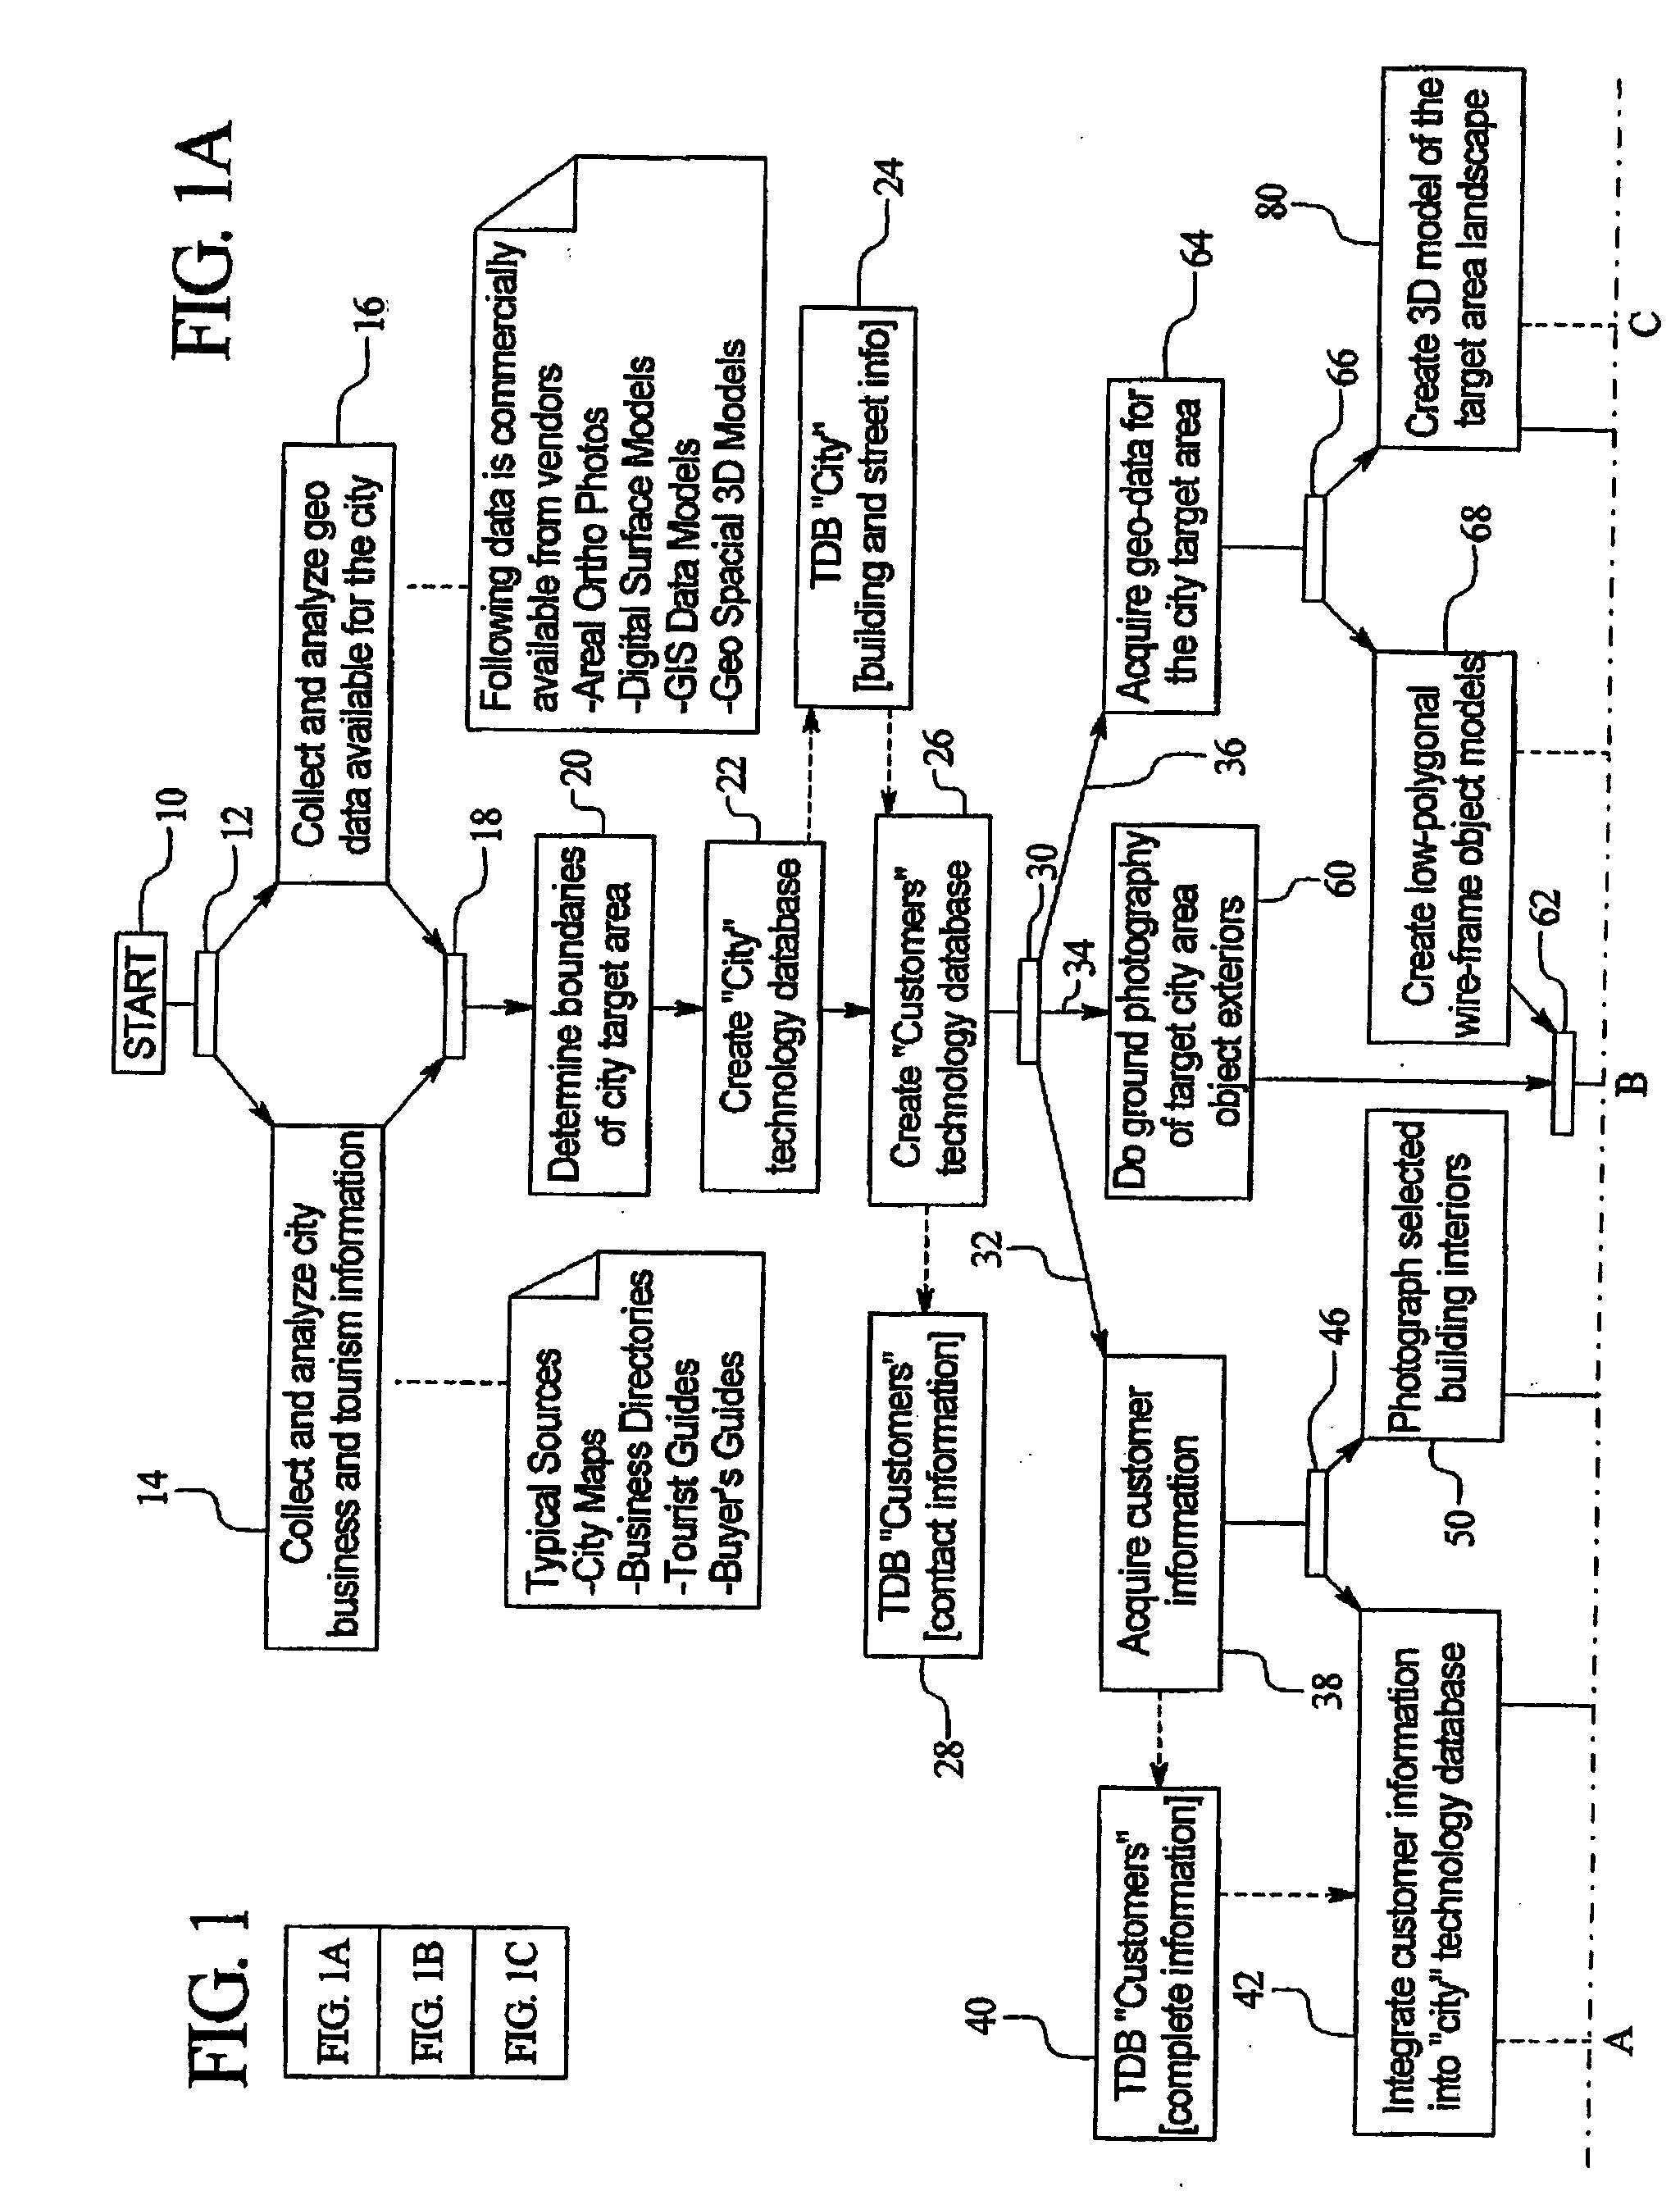 System and method for minimizing the amount of data necessary to create a virtual three-dimensional environment